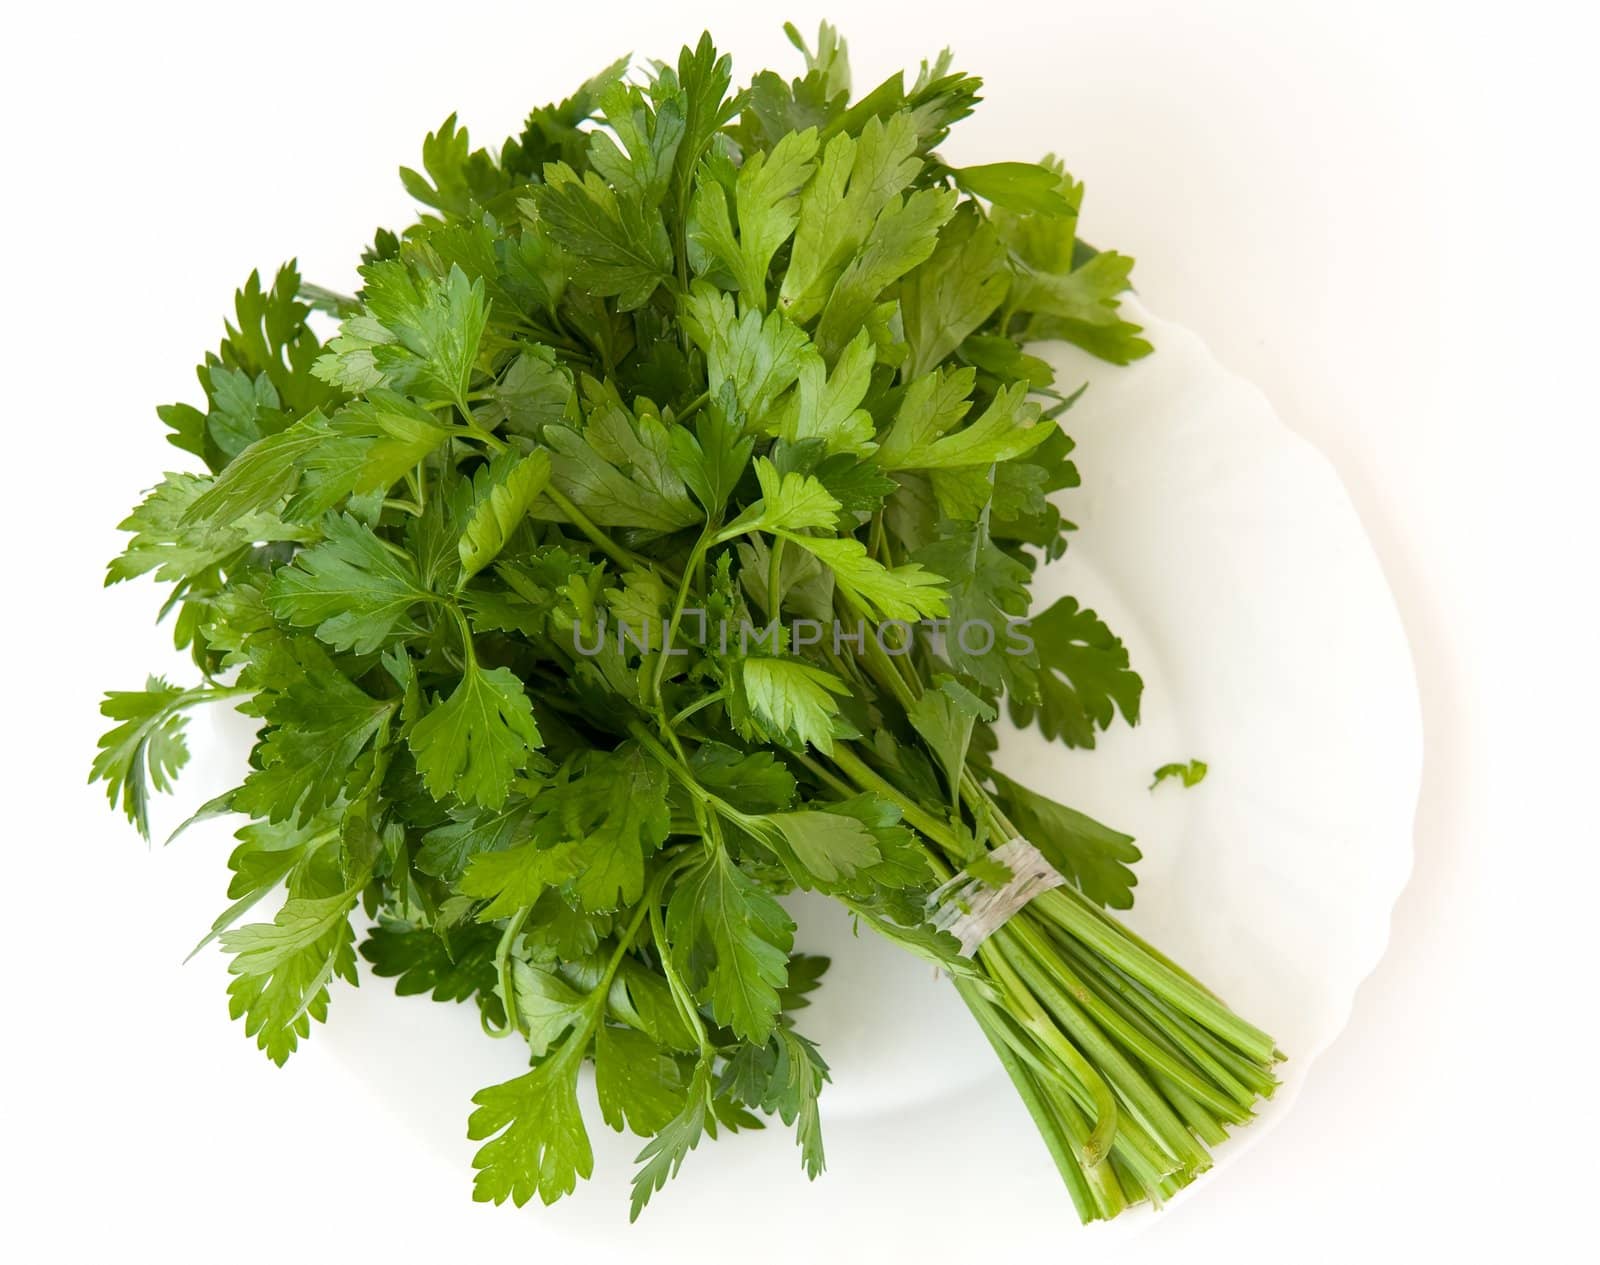 Fresh green parsley a white plate on a white background.